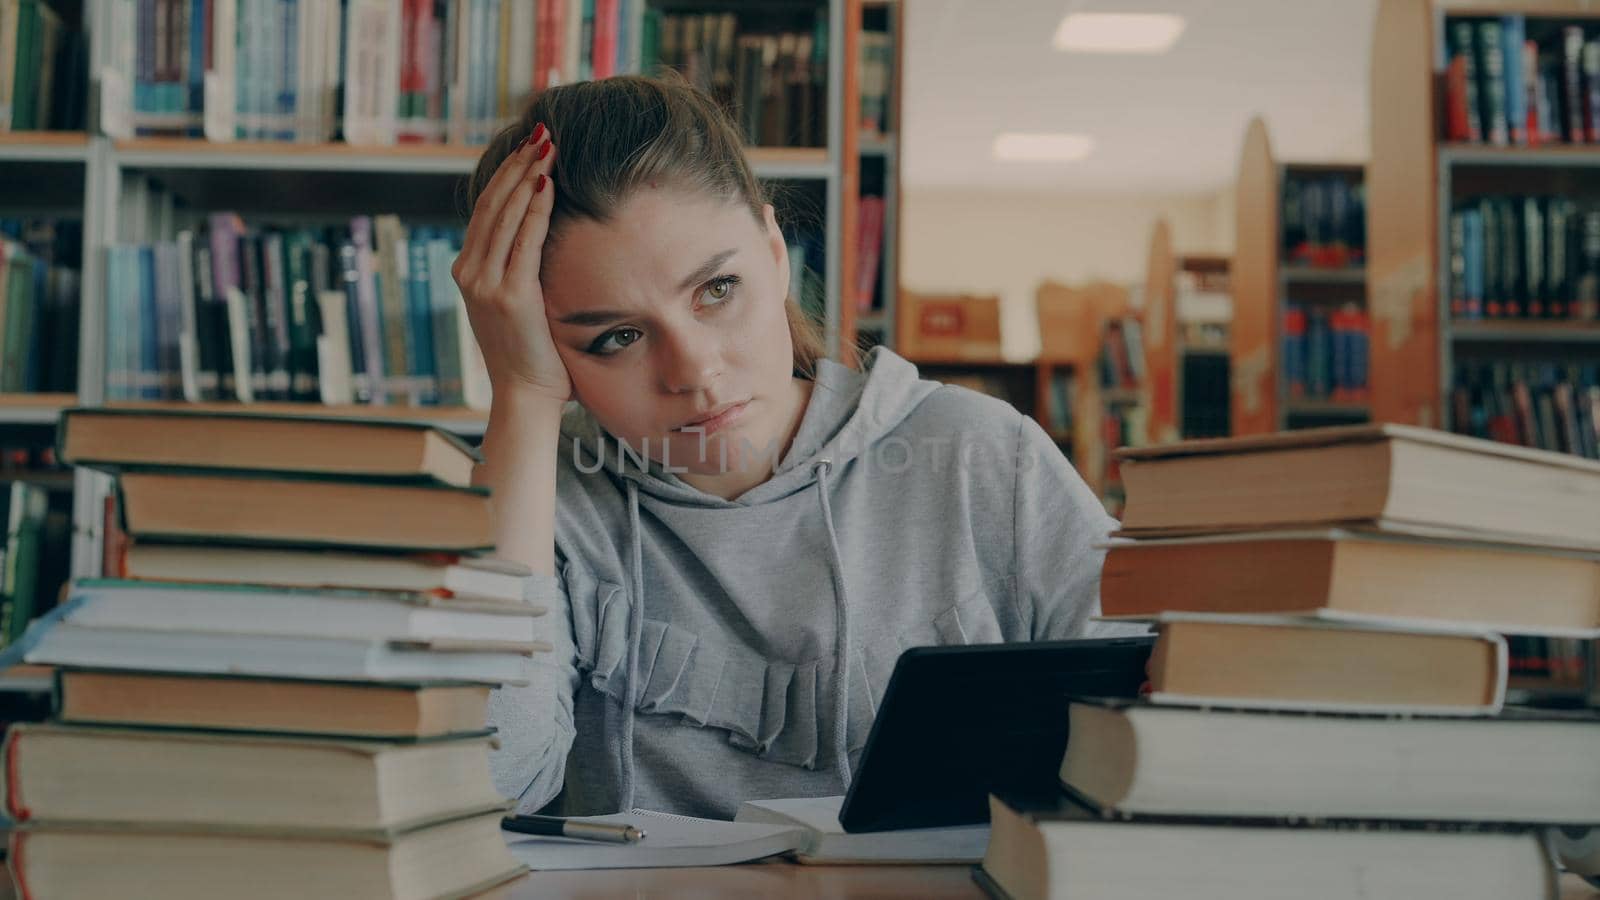 Beautiful caucasian woman is sitting at table in university library surrounded by piles of books holding digital tablet. She is tired and exhausted